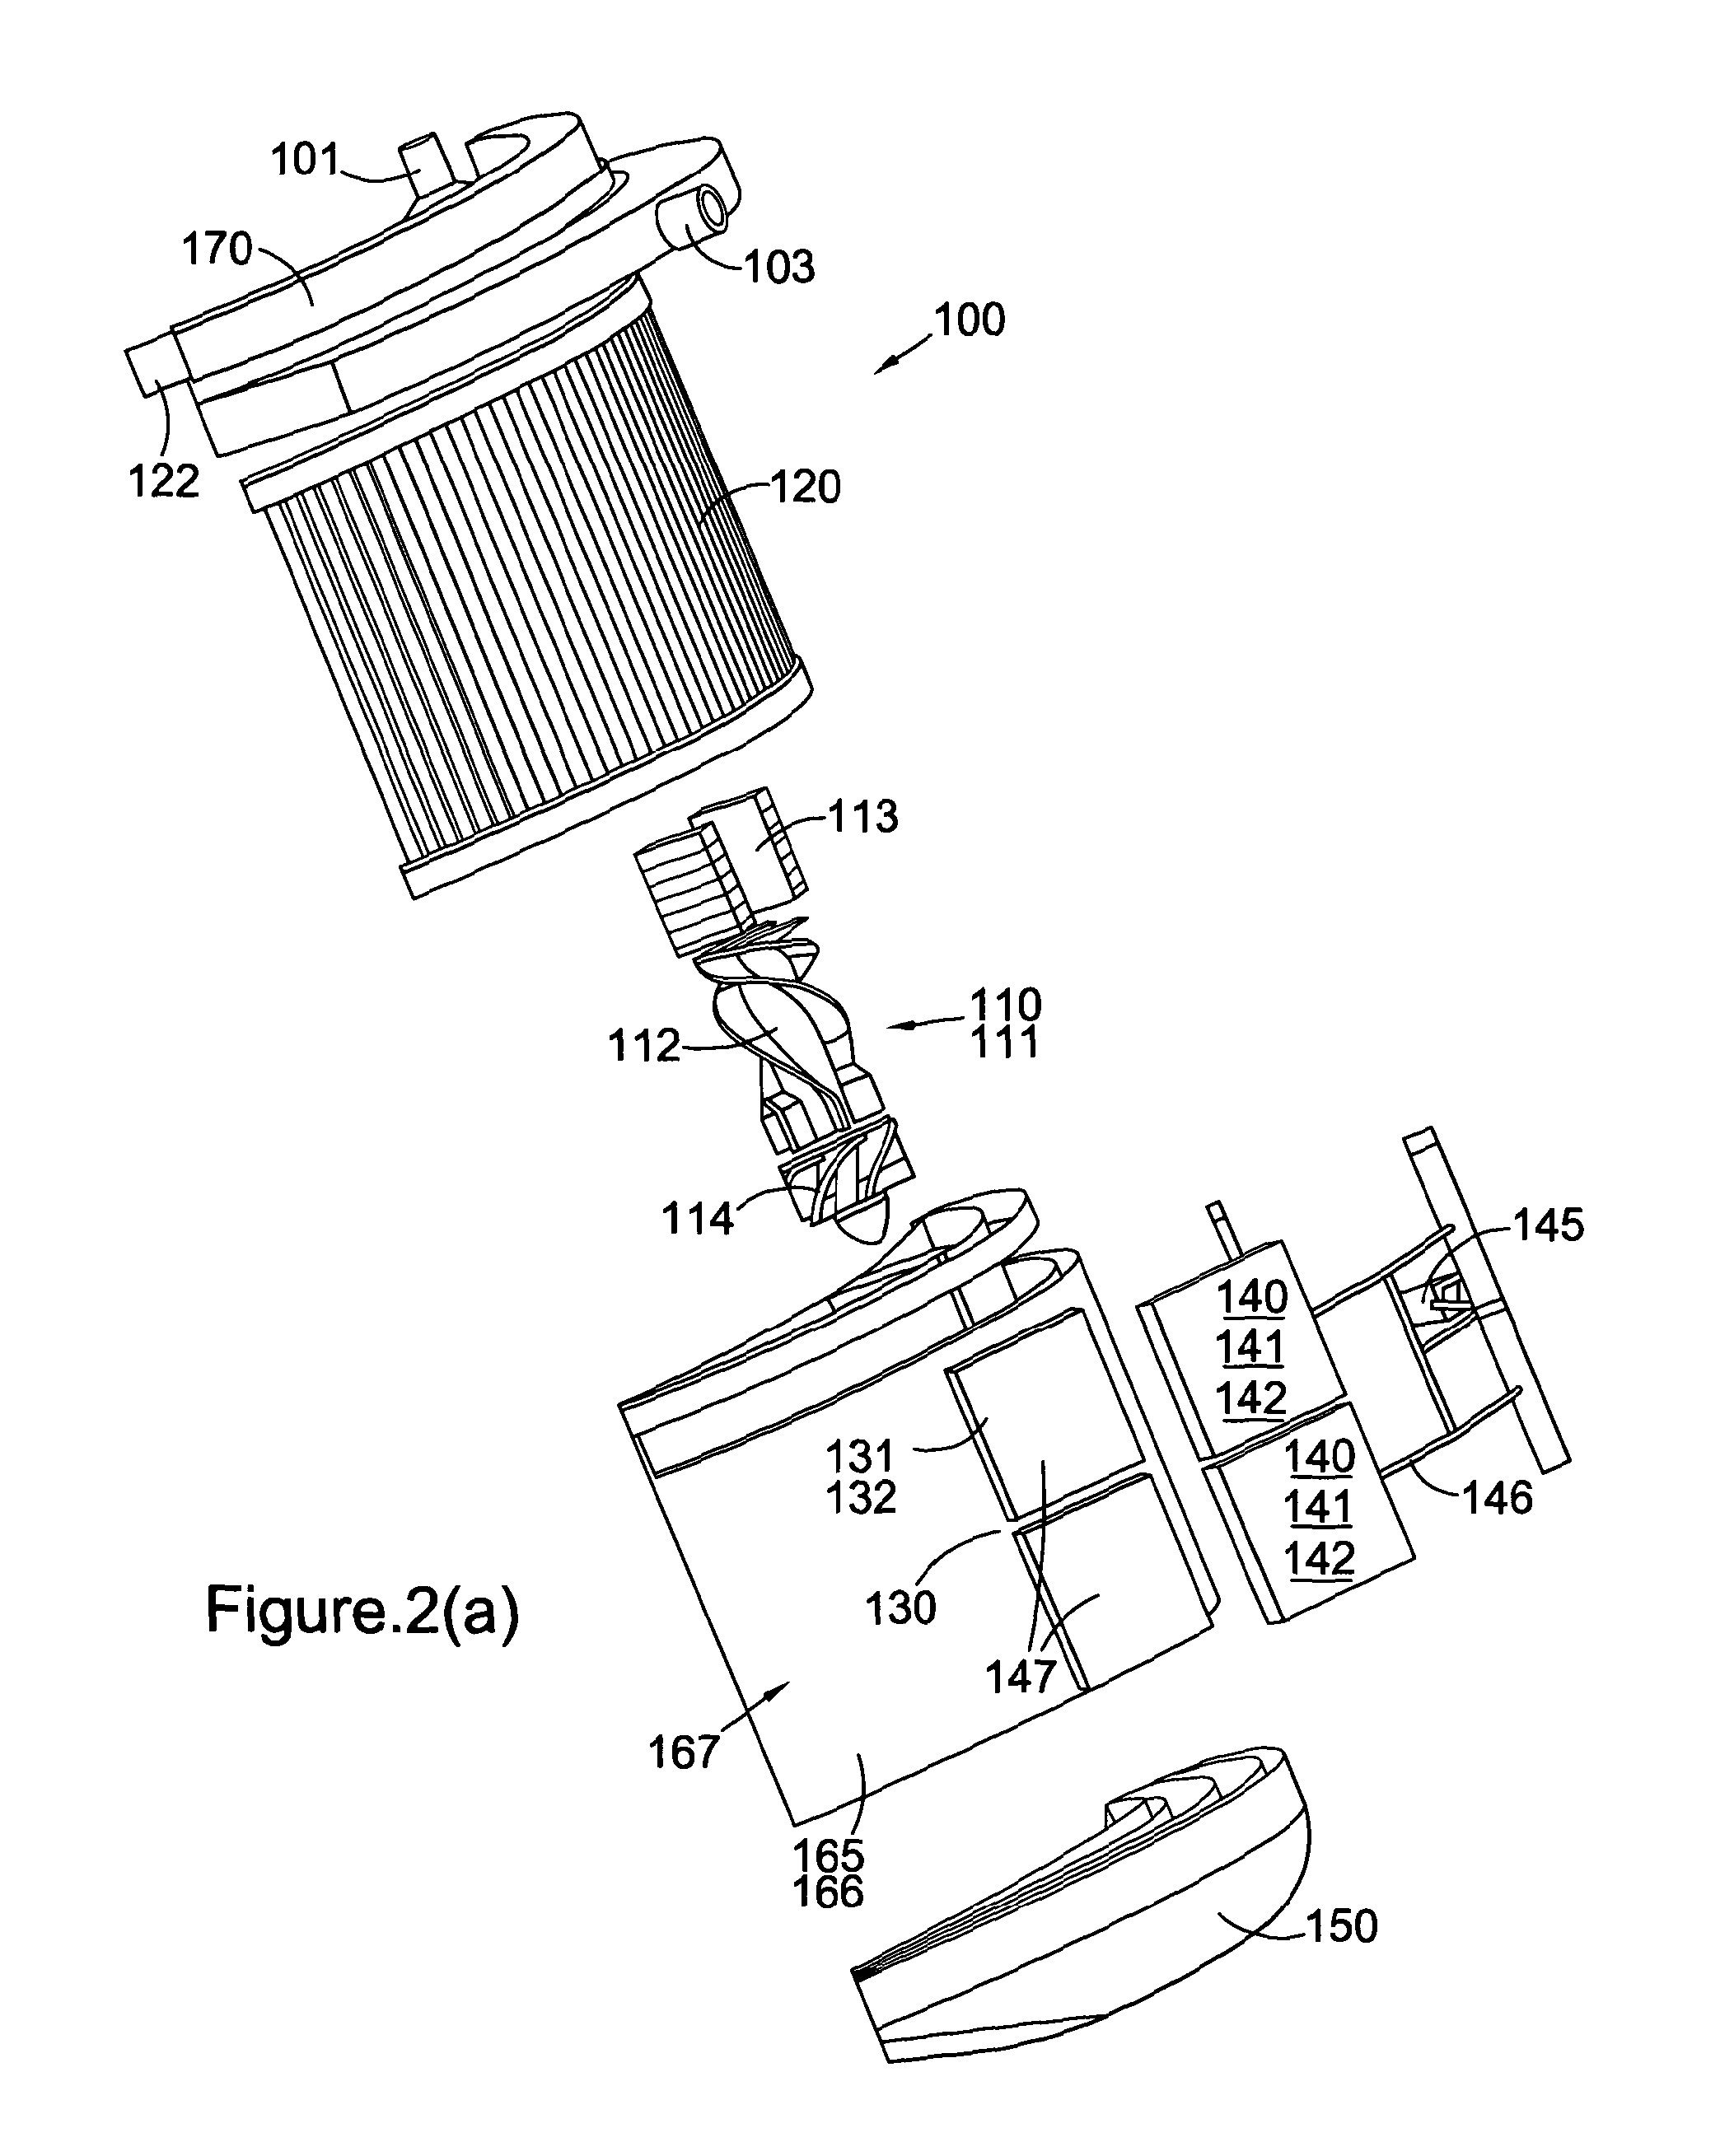 Integrated perfusion device